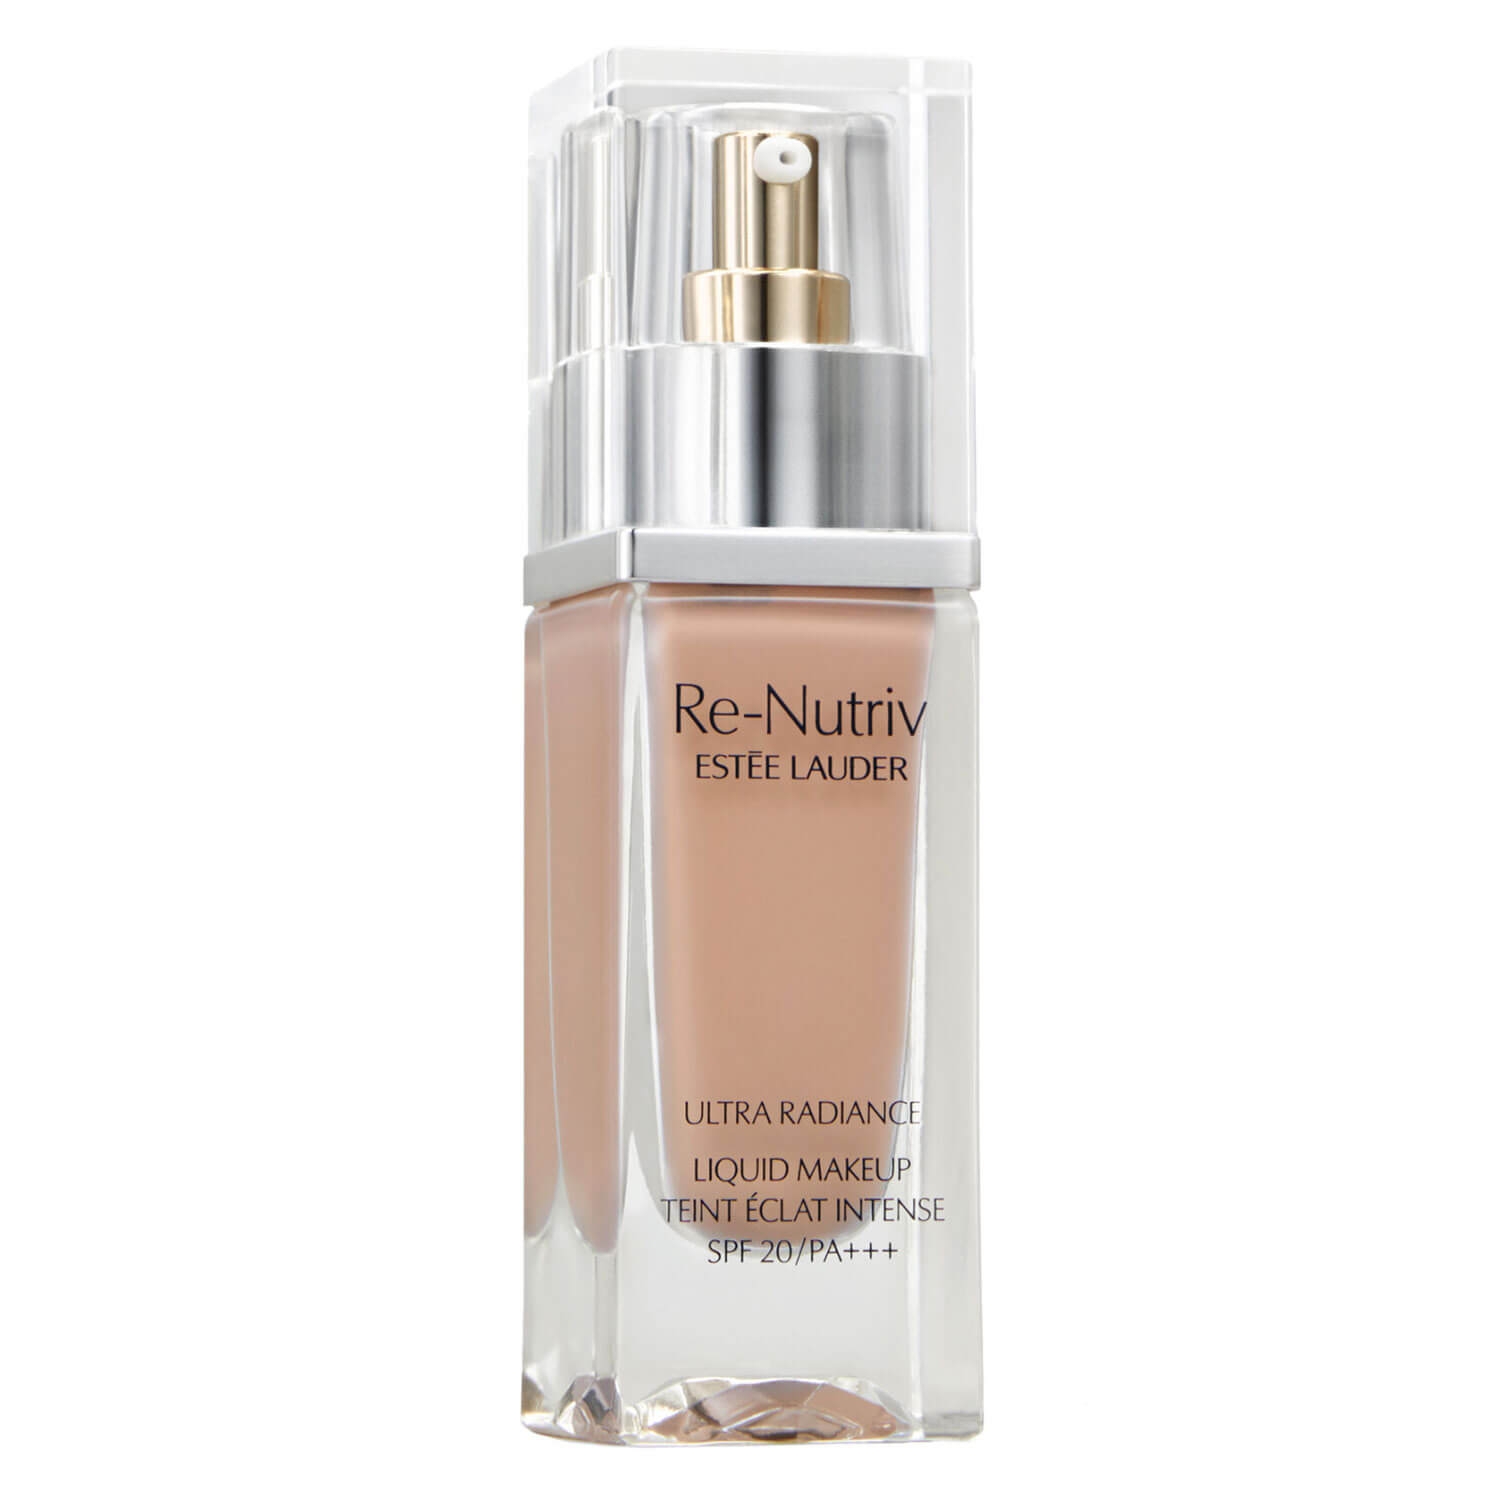 Product image from Re-Nutriv - Ultra Radiance Liquid Makeup SPF20 Pale Almond 2C2